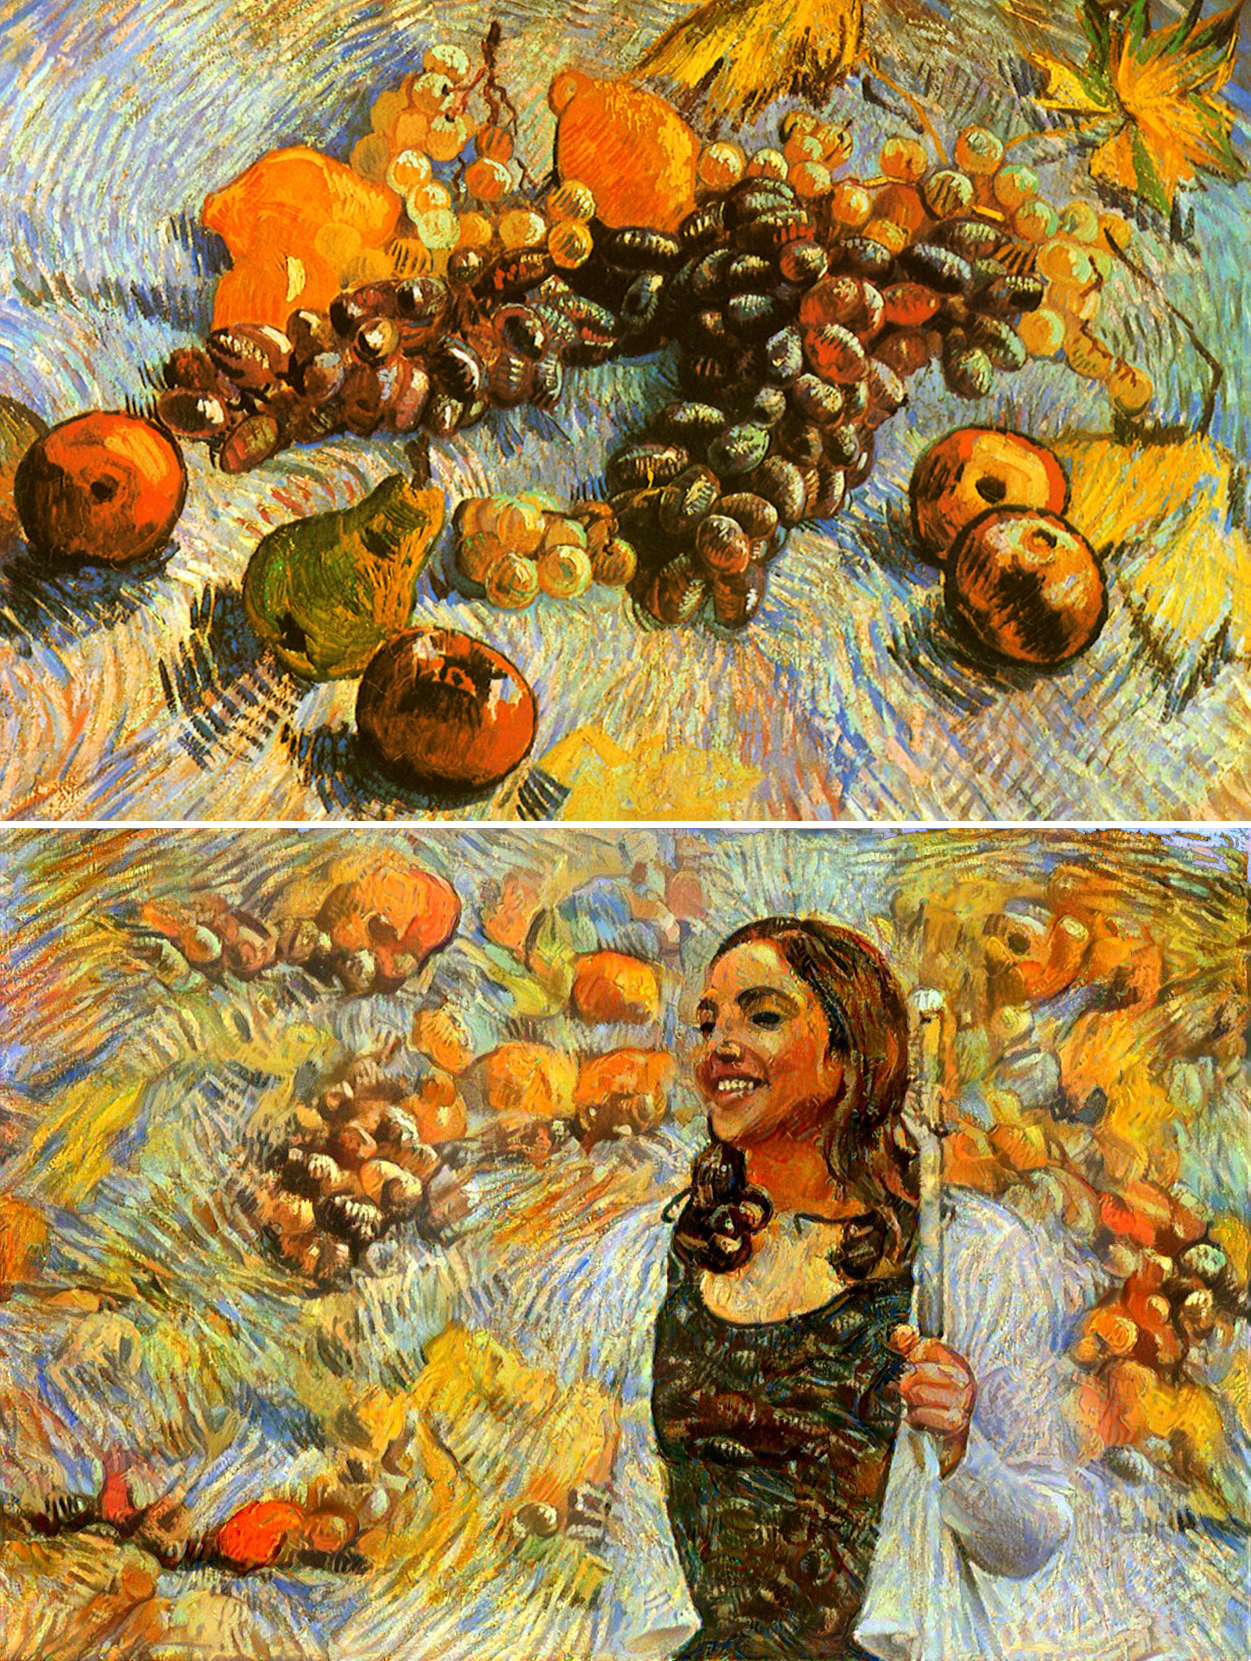 This image (above) was created using artificial intelligence to replicate Van Gogh's style (top). In a world where marvels like this are possible, we must ask 'What is real? What can we believe in? Who can we trust? And where do we fit in the big picture?'